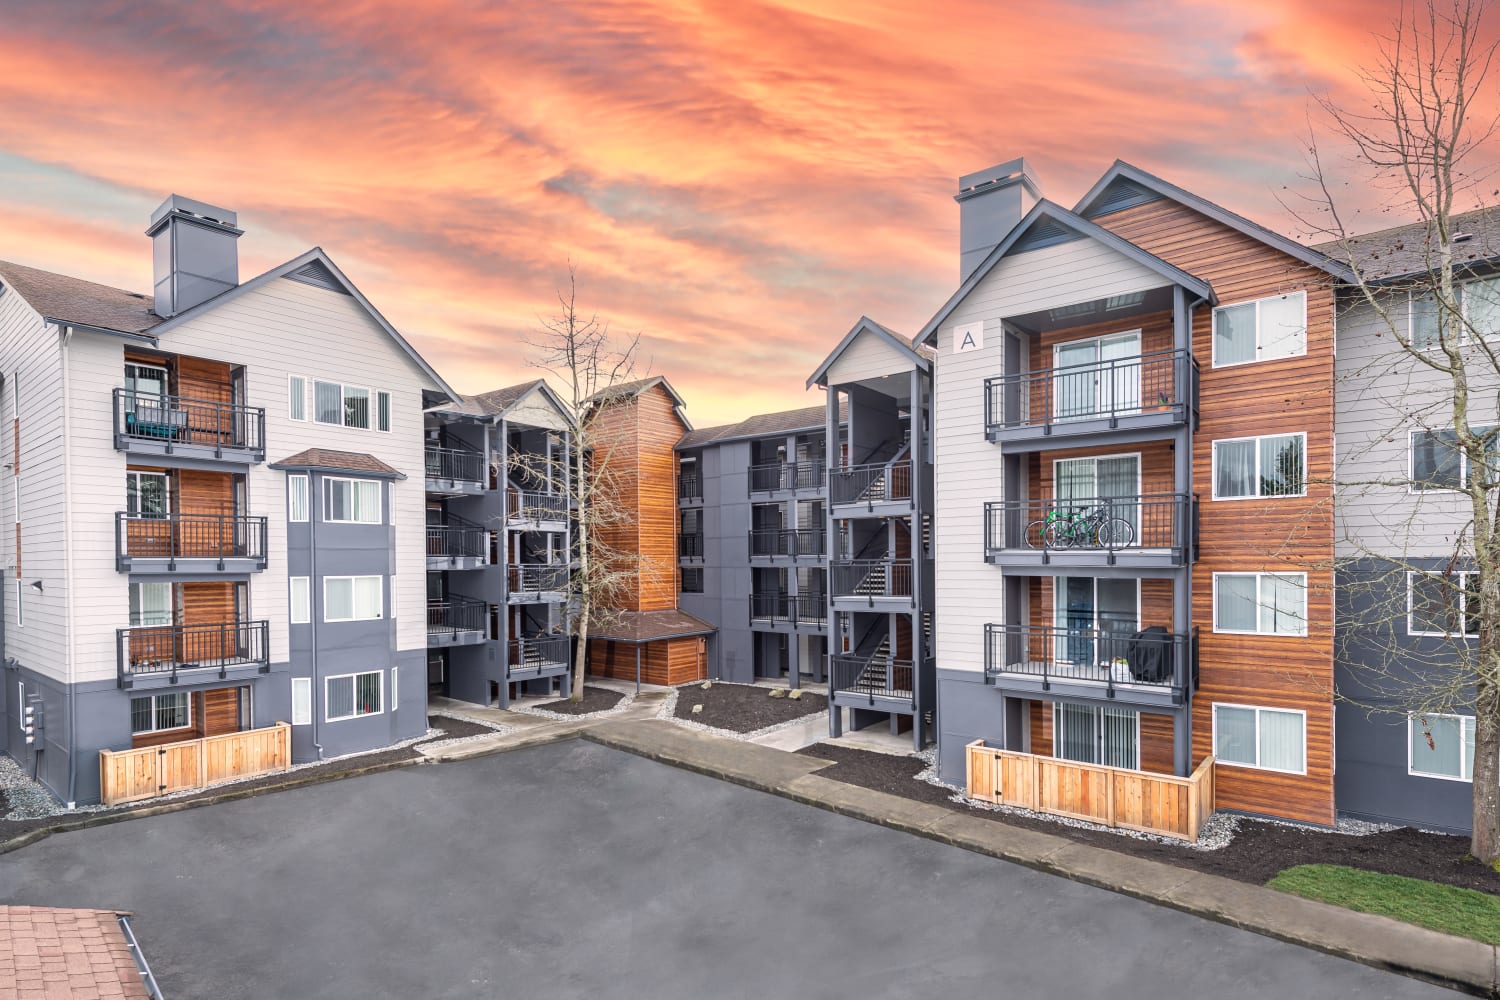 Exterior of Redmond Place Apartments community buildings at sunset in Redmond, Washington